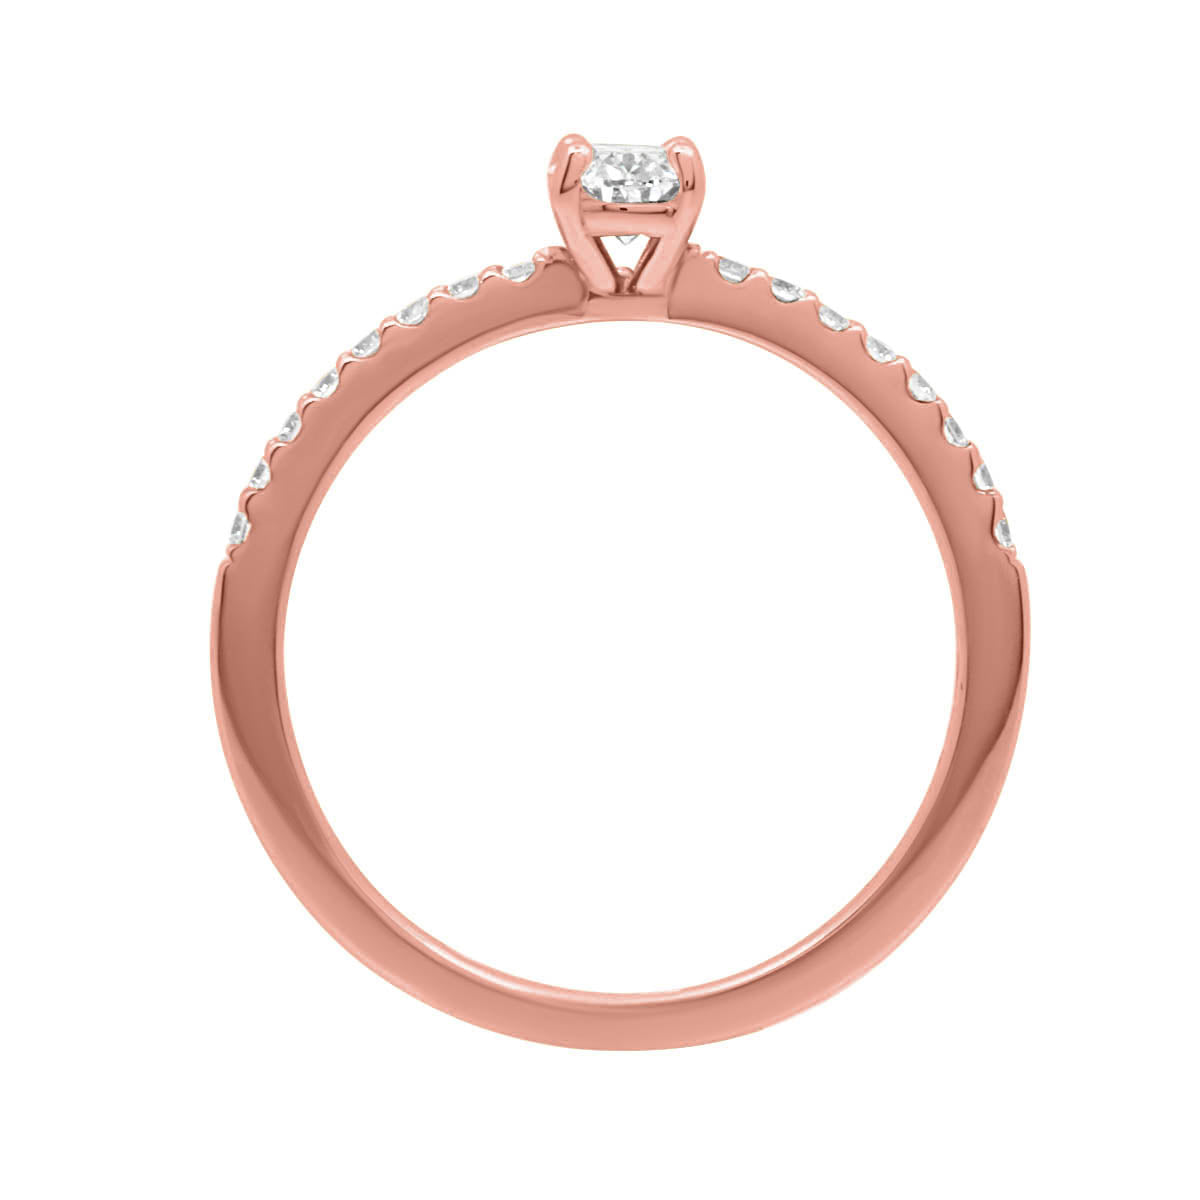 Oval with Scallop Set Band in rose gold upright position